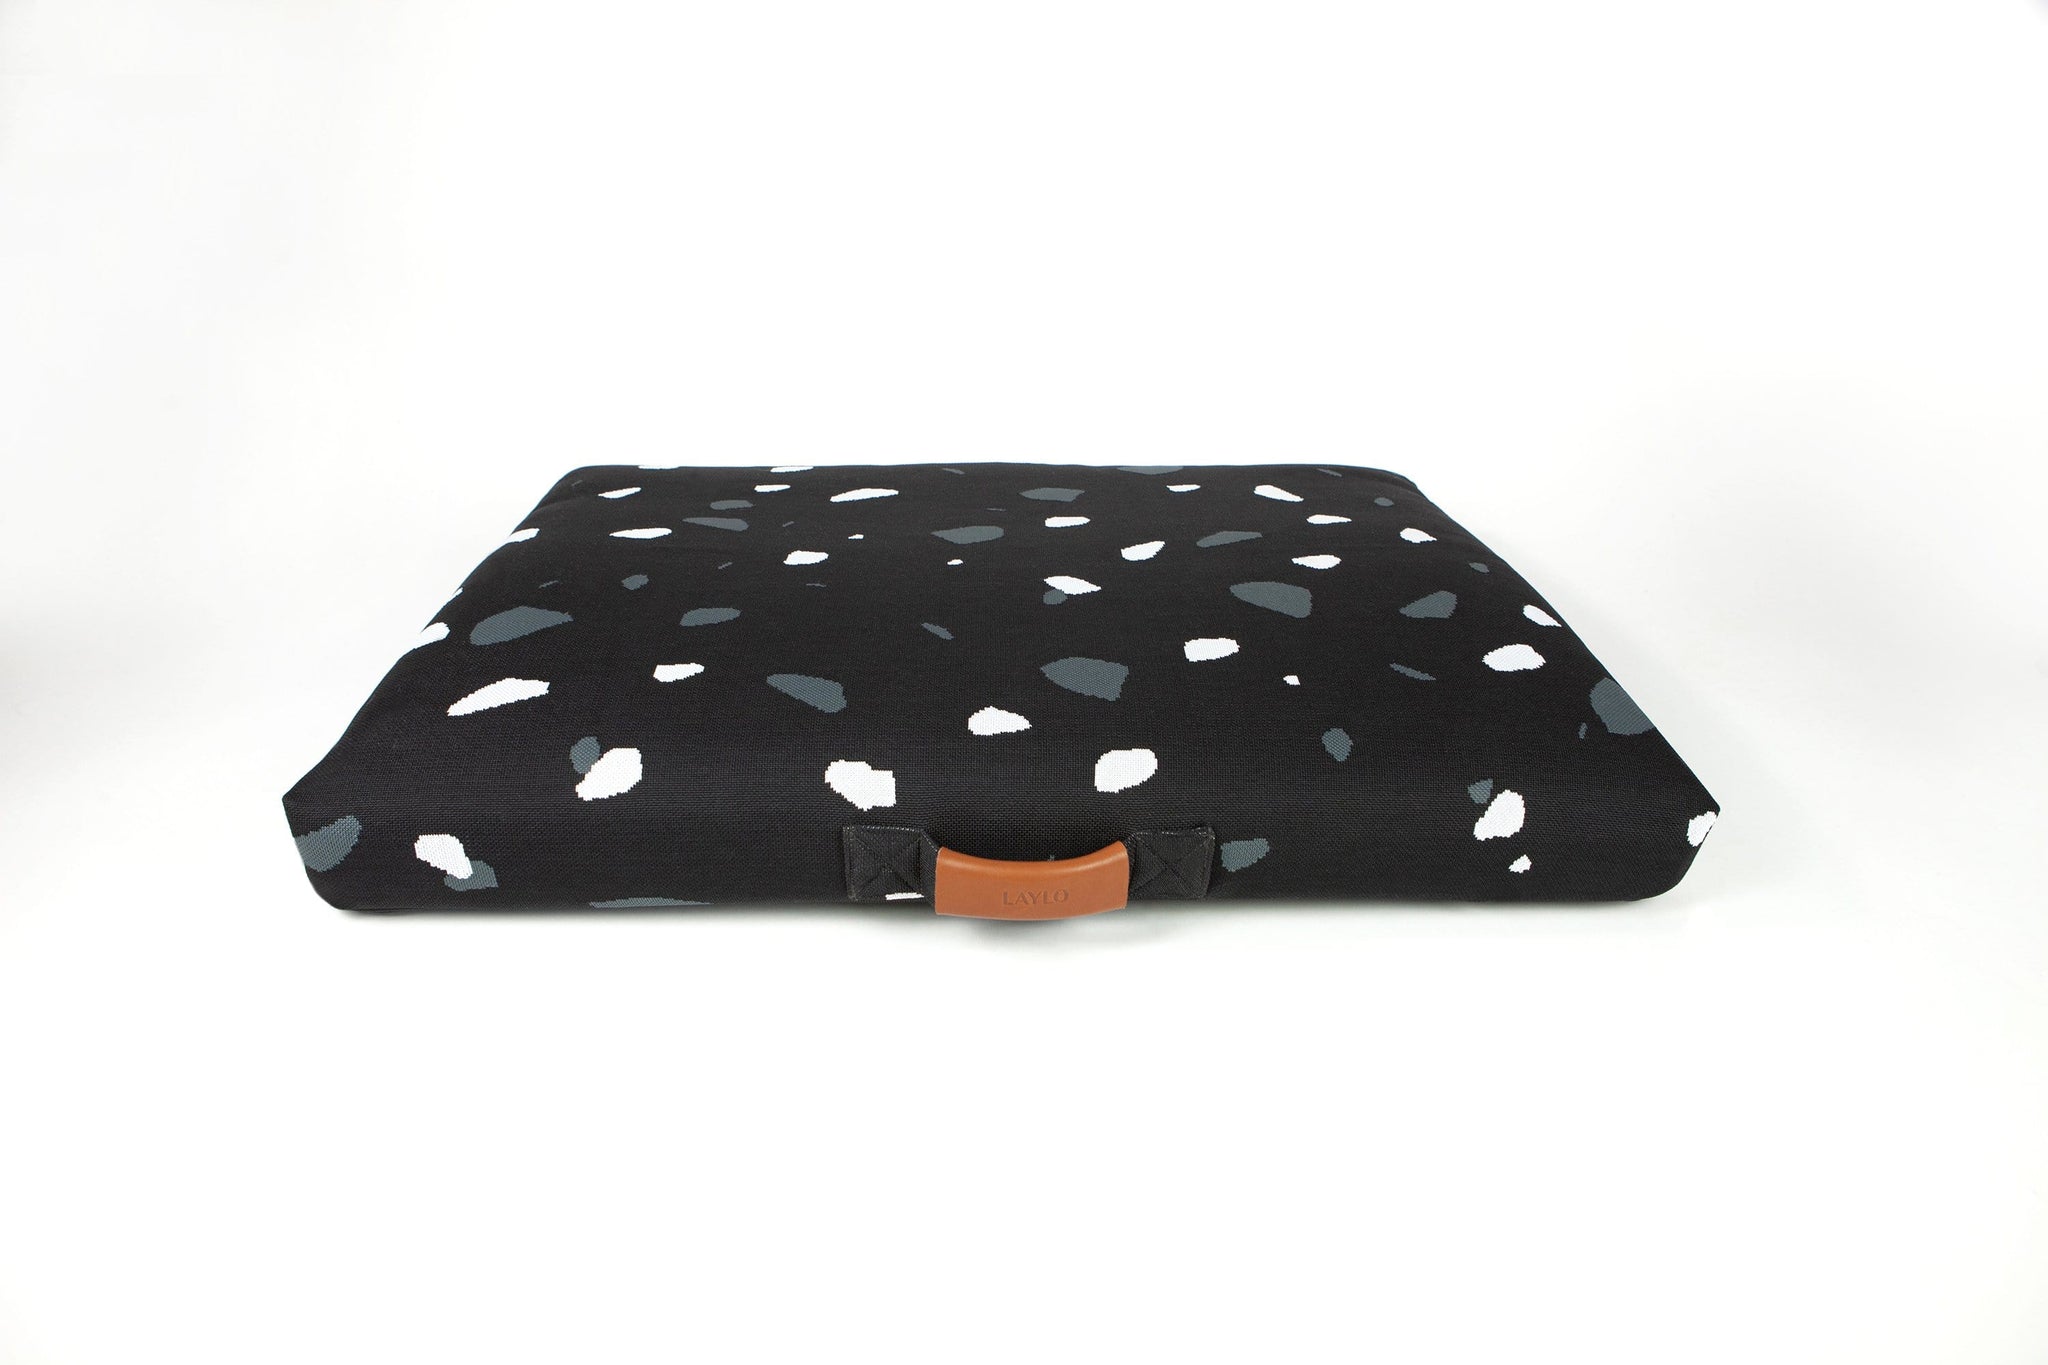 Laylo Pets Terrazzo LAY LO - Black Terrazzo Mid-Century Modern Dog Bed or Bed Cover Lay Lo Pets